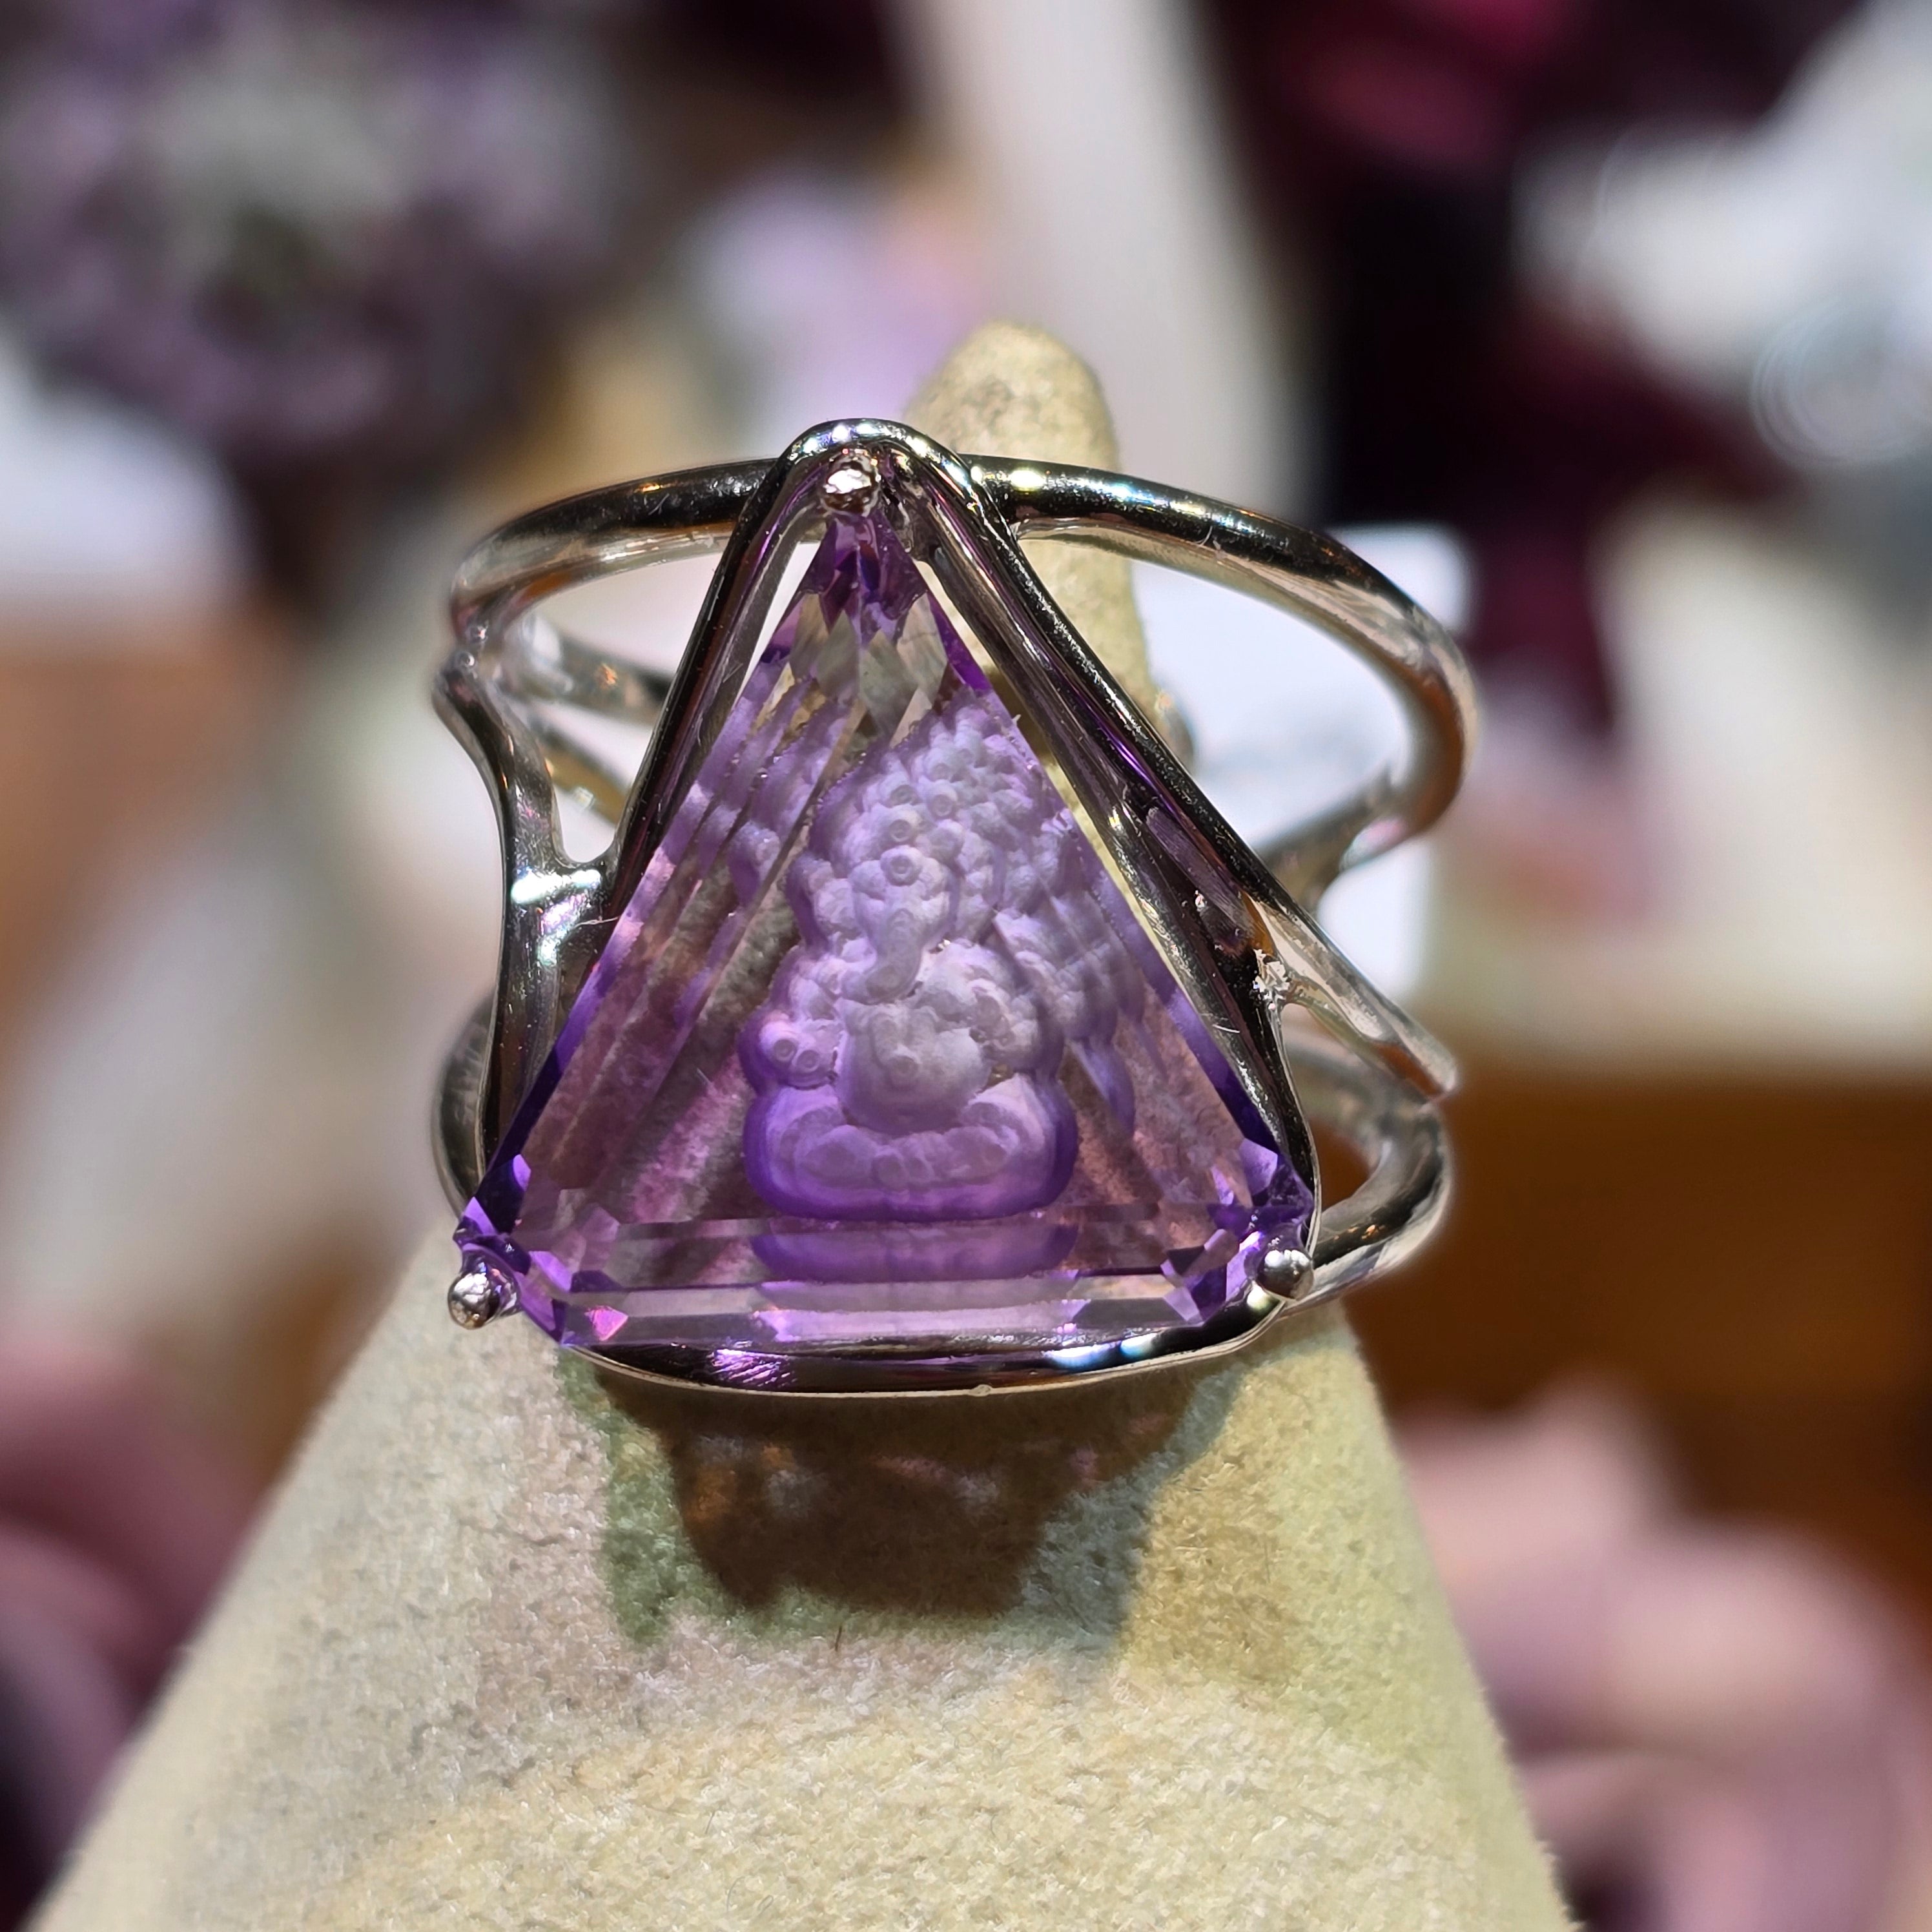 Amethyst Ganesha Finger Cuff Adjustable Ring .925 Silver for Divine Connection and Clearing Blockages